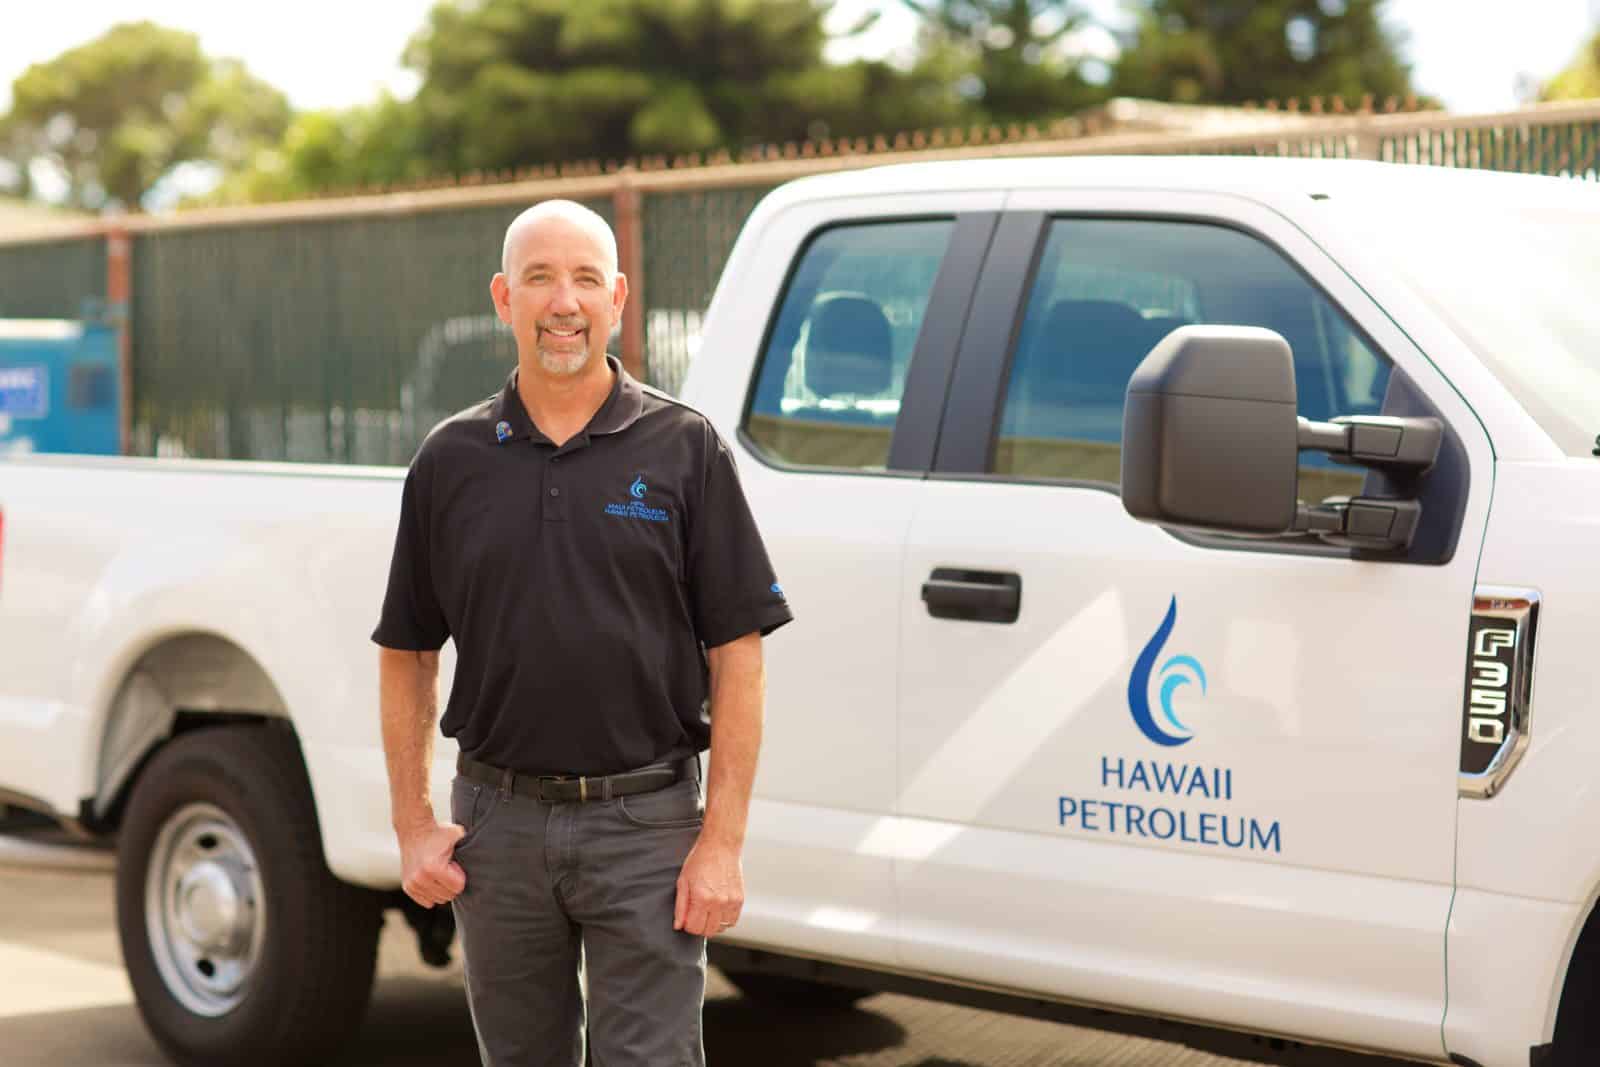 Wetter stands and smiles in front of a Hawaii Petroleum pick up truck.